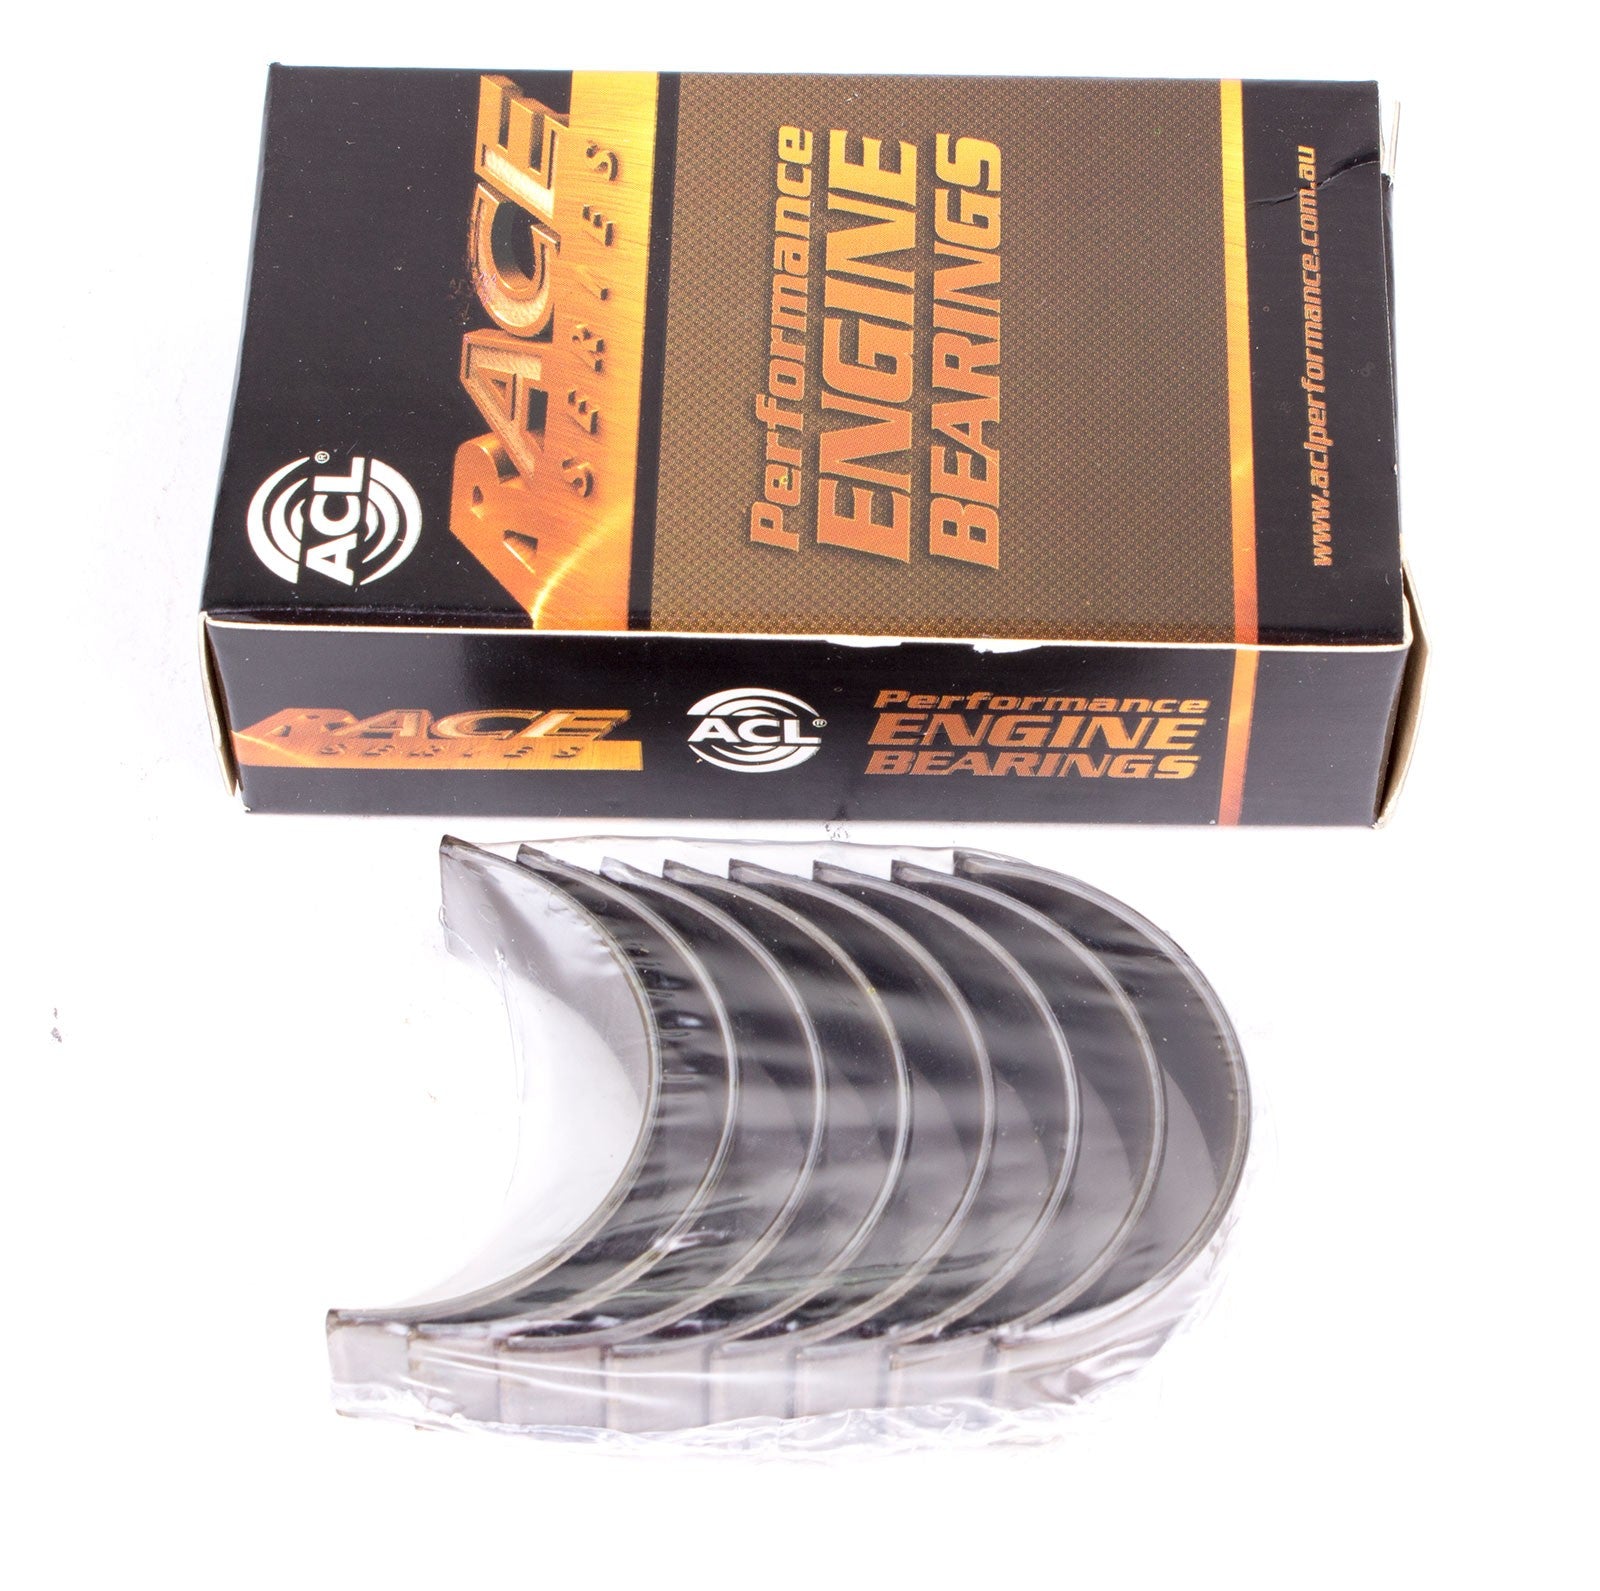 ACL 5M7298H-20 Main bearing set (ACL Race Series) Photo-0 